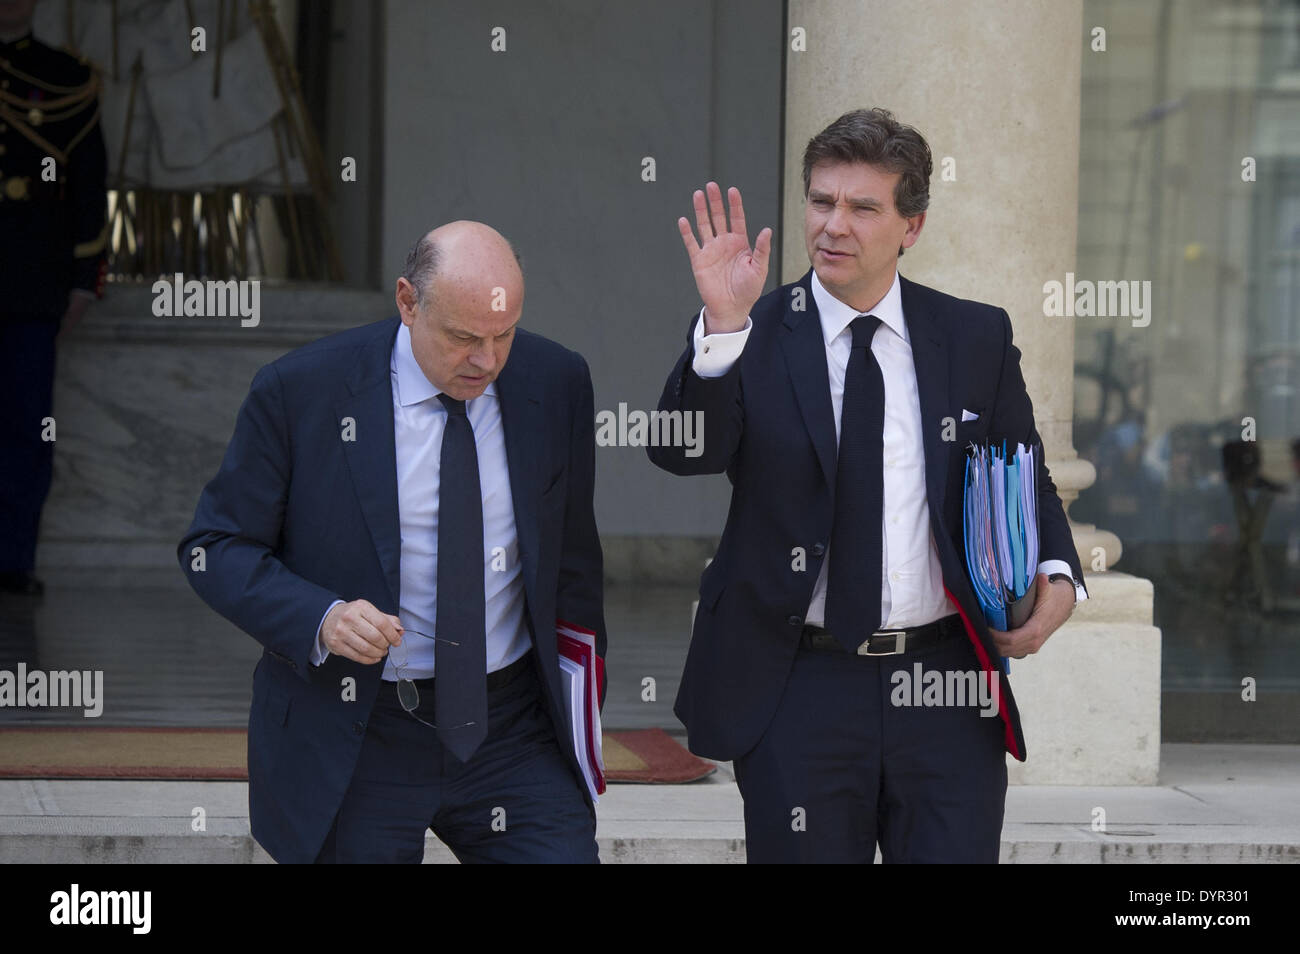 Paris, FRA. 23rd Apr, 2014. French Economy Minister Arnaud Montebourg (R) greets as he leaves the Elysee Palace in Paris with French Junior Minister for Relations with Parliament Jean-Marie Le Guen (L) leave the Elysee palace on April 23, 2014, in Paris, after the weekly cabinet meeting. (Photo/Zacharie Scheurer) © Zacharie Scheurer/NurPhoto/ZUMAPRESS.com/Alamy Live News Stock Photo